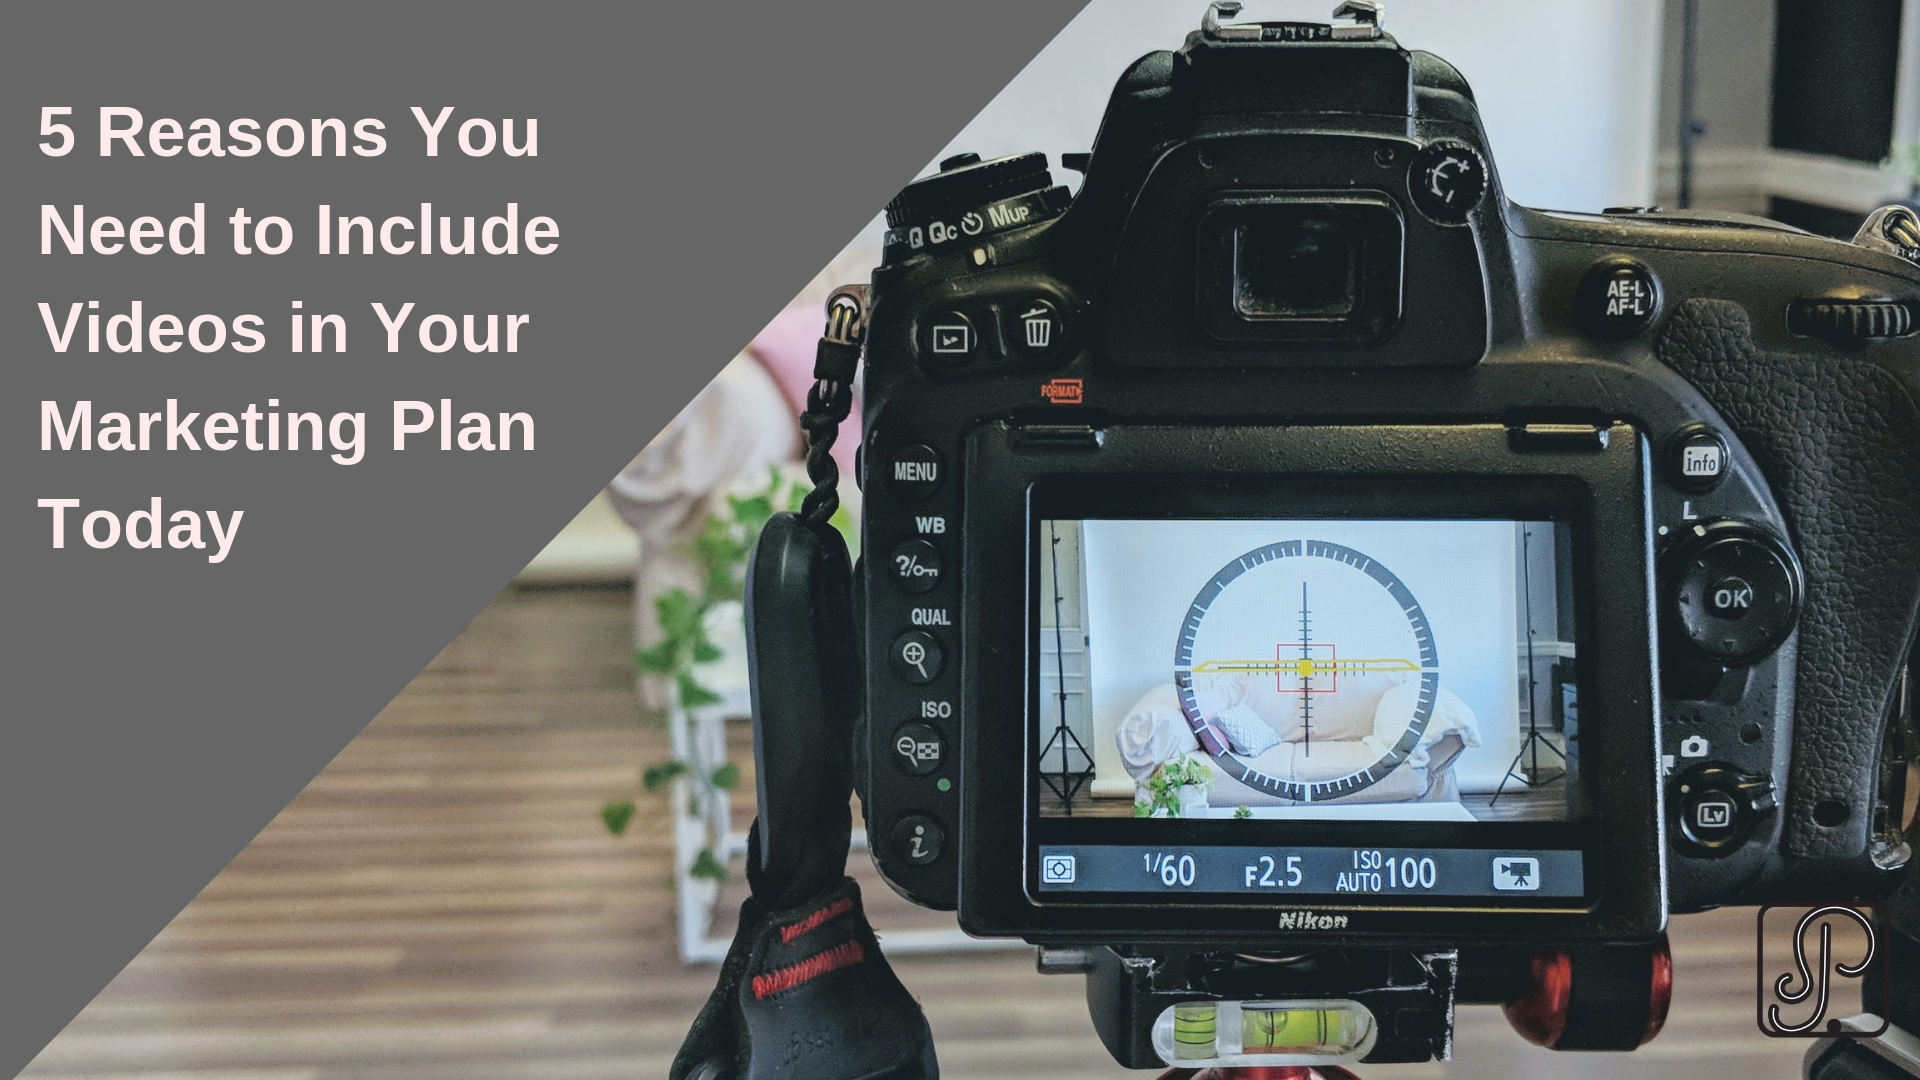 5 Reasons You Need to Include Videos in Your Marketing Plan Today